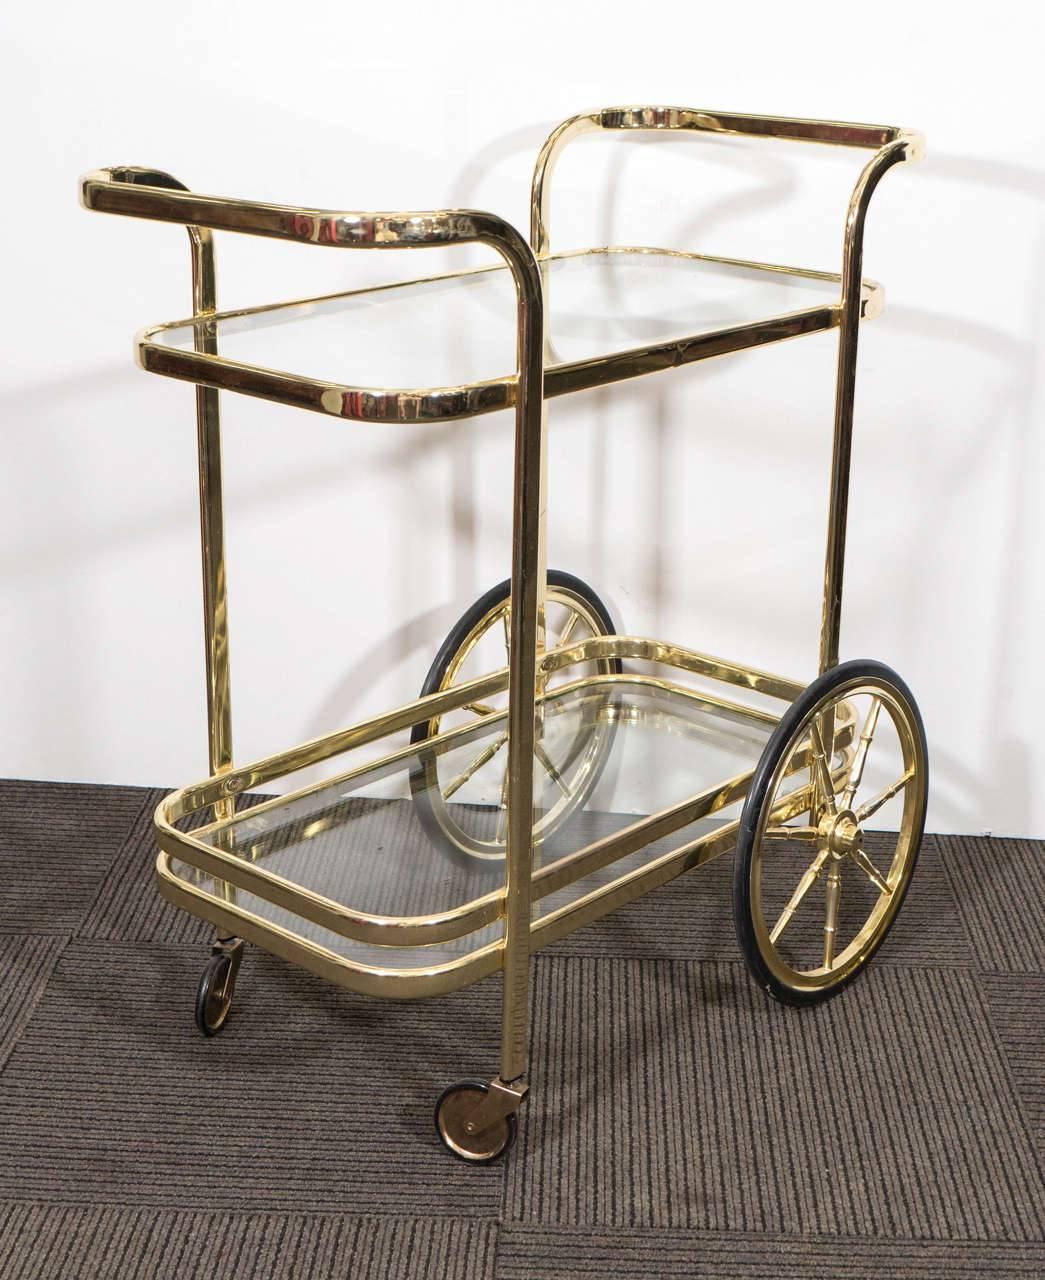 A stunning two-tier tea or bar cart in brass with spoke wheels in the style of Milo Baughman, circa 1970.